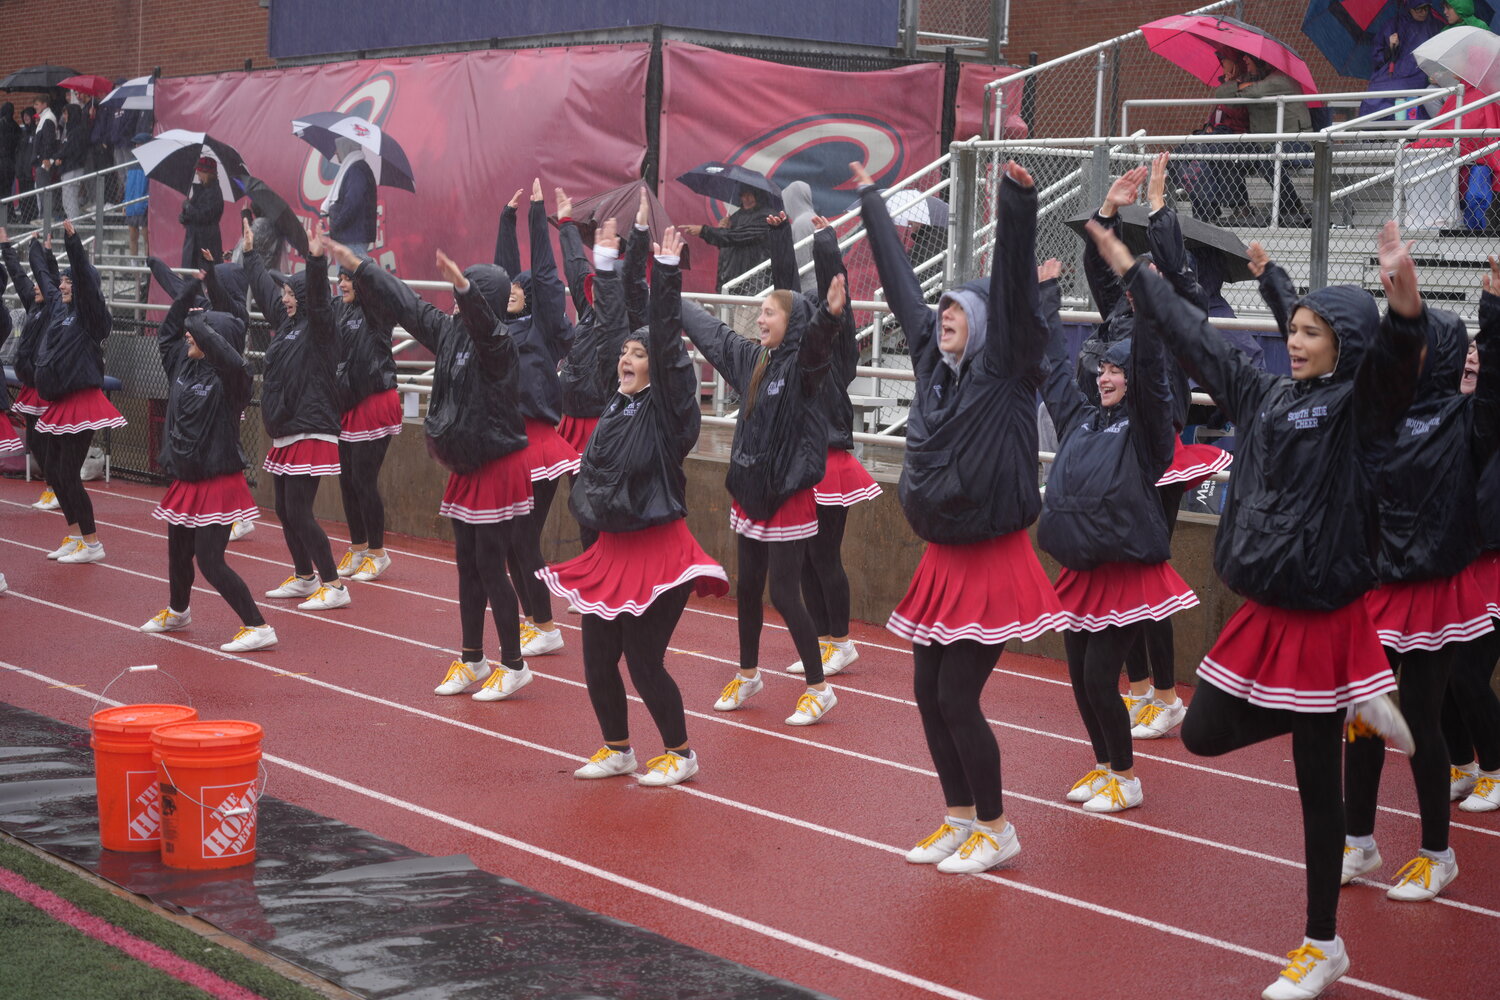 The South Side cheer team came to support the football squad despite the rainy weather.